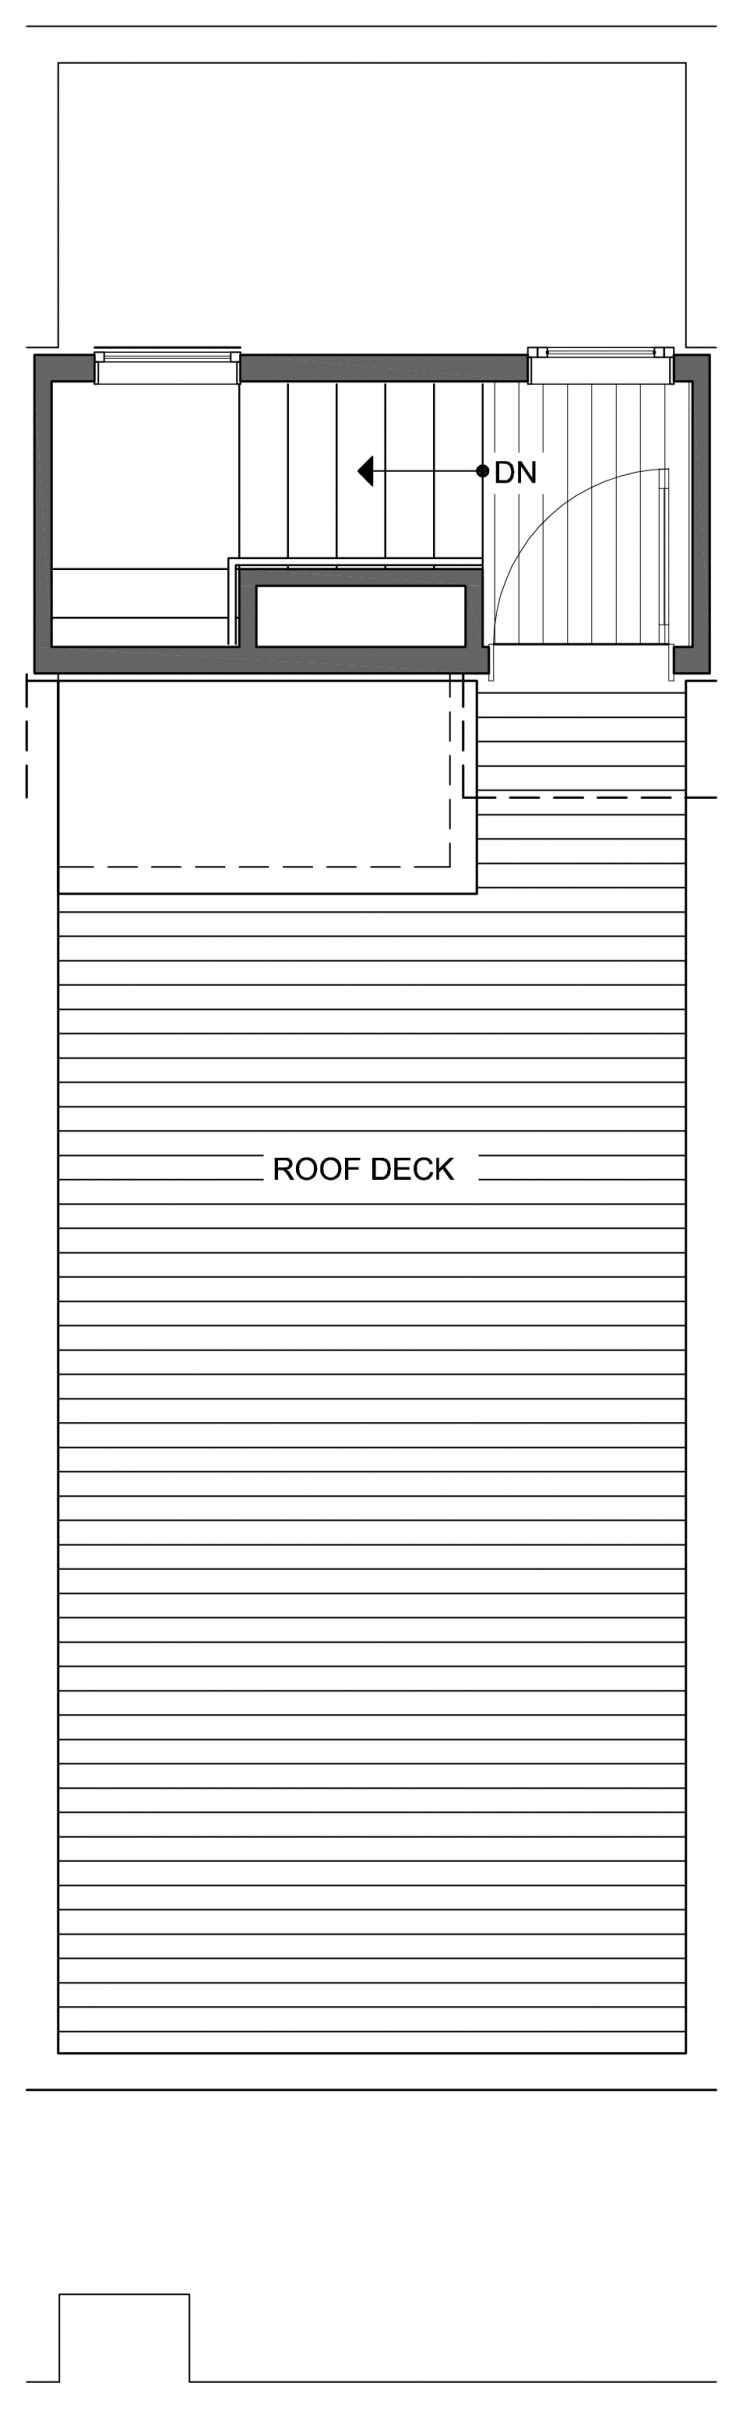 Roof Deck Floor Plan of 806D N 46th St, One of the Nino 15 East Townhomes by Isola Homes